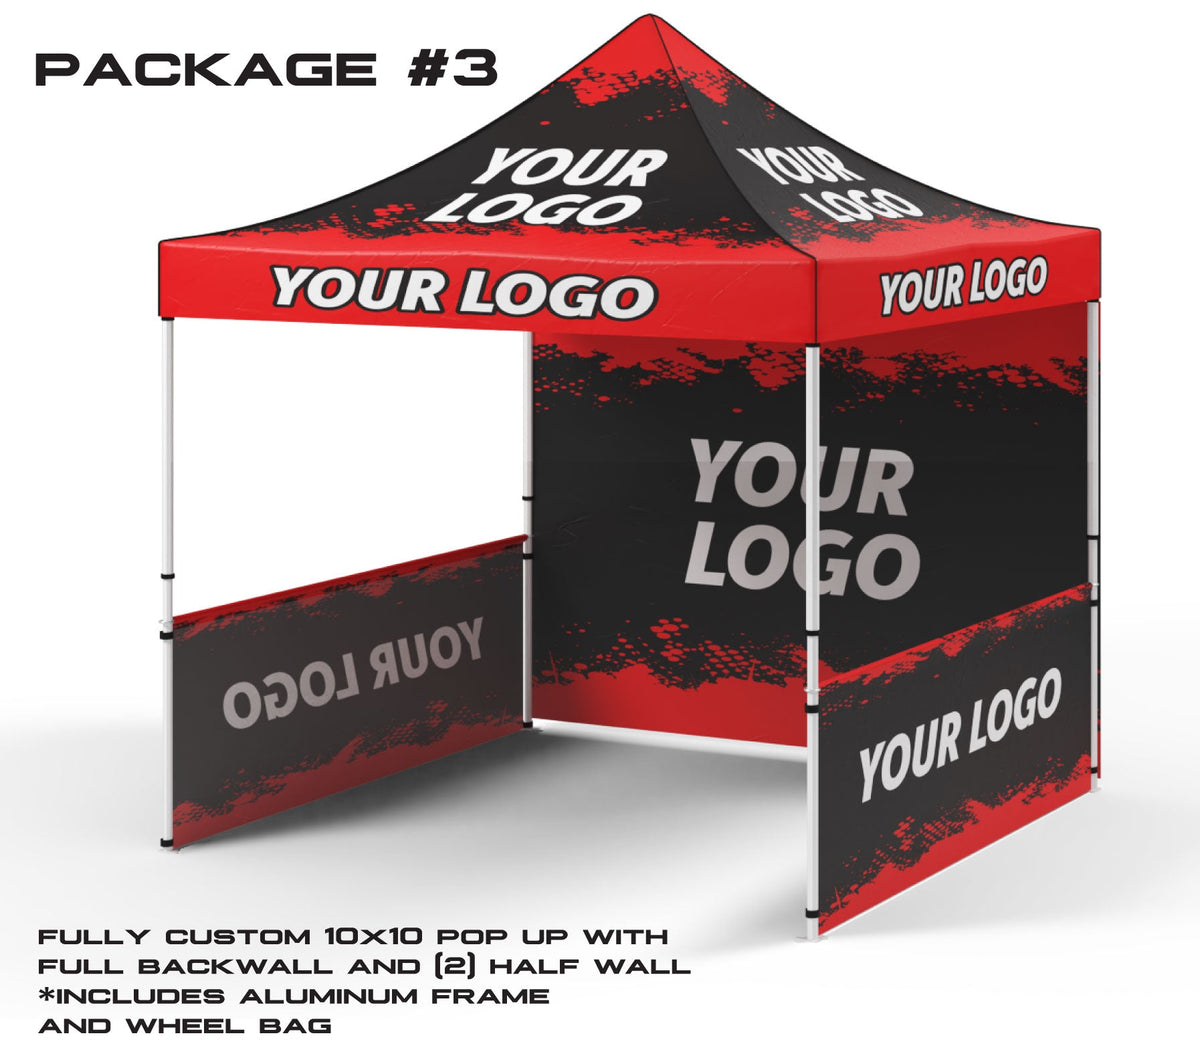 10x10 Package #3